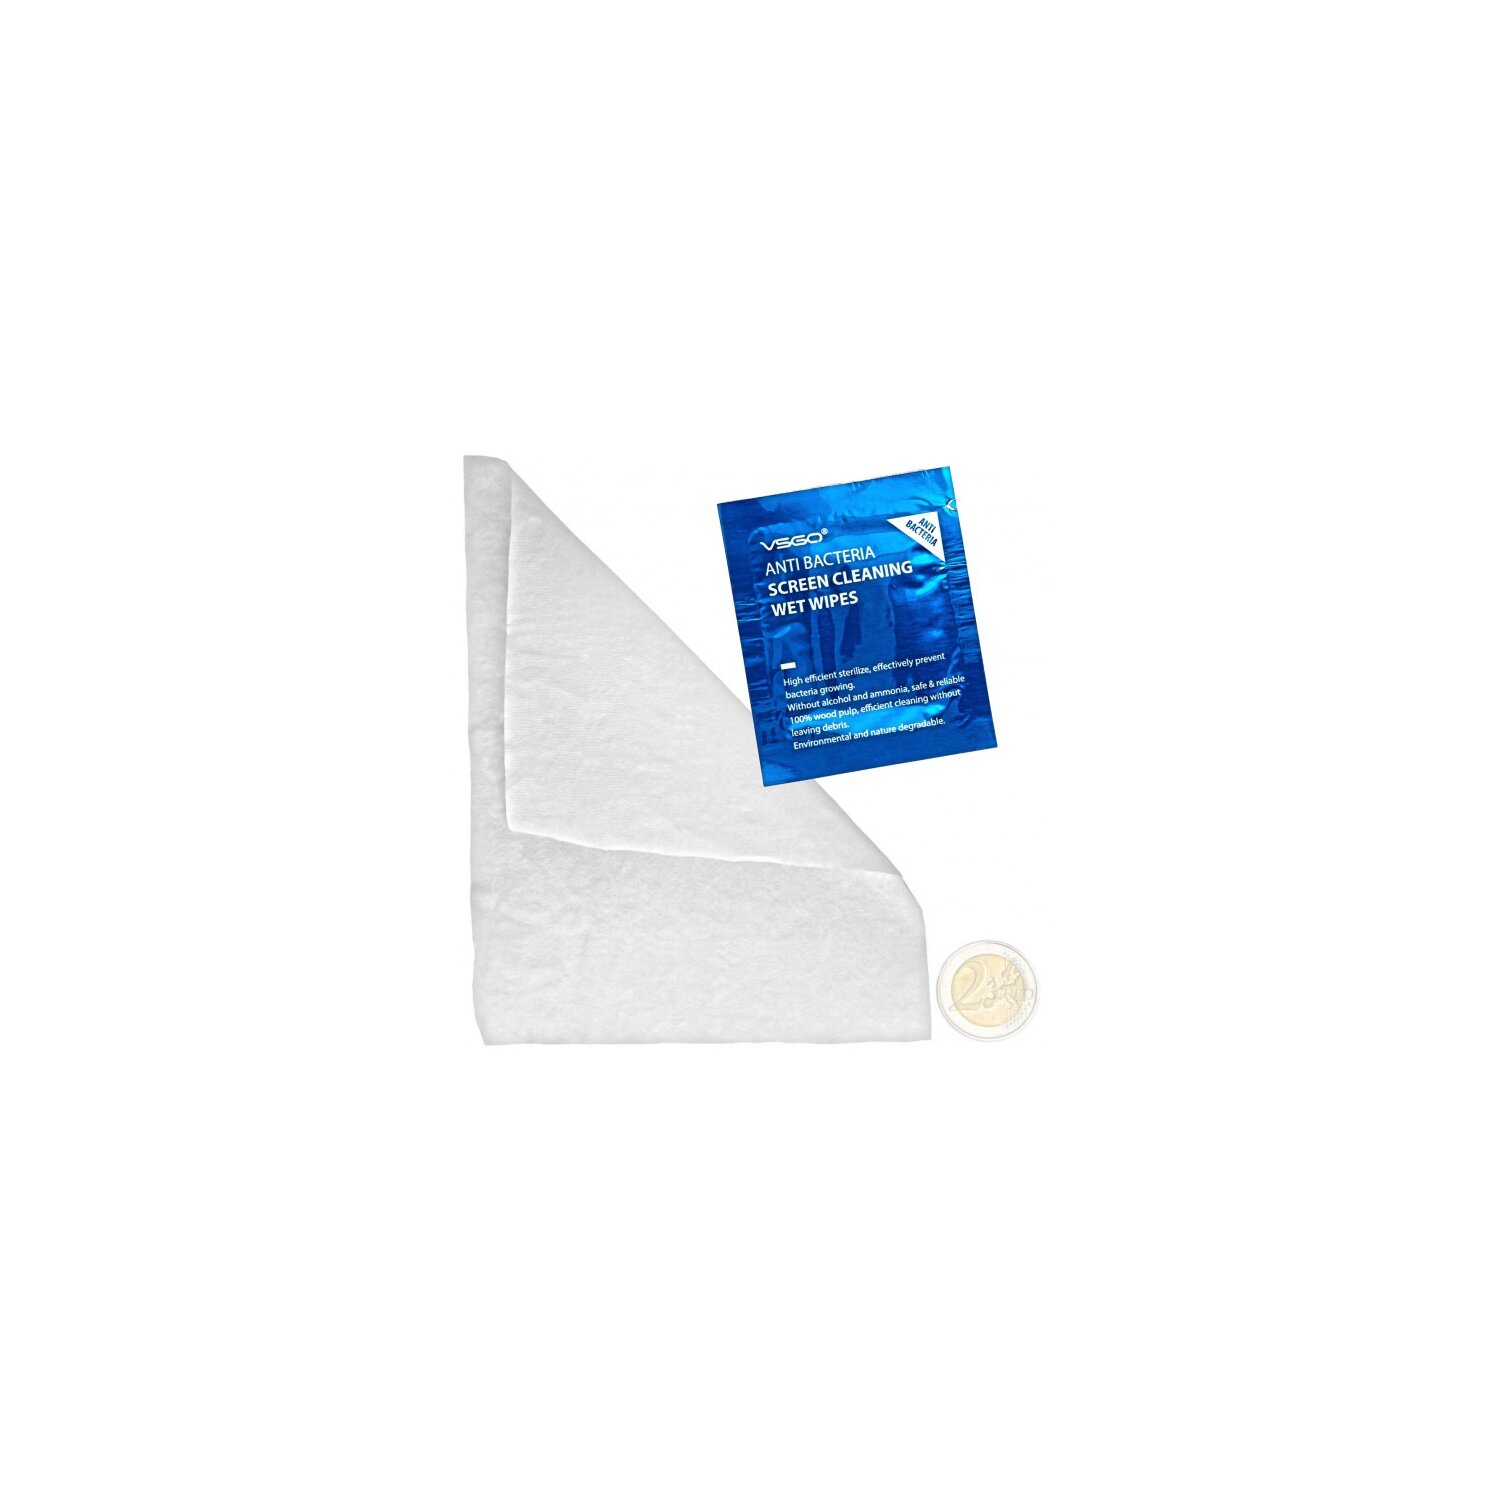 VSGO Mobile Phone Screen Cleaning Wipes CDW-2